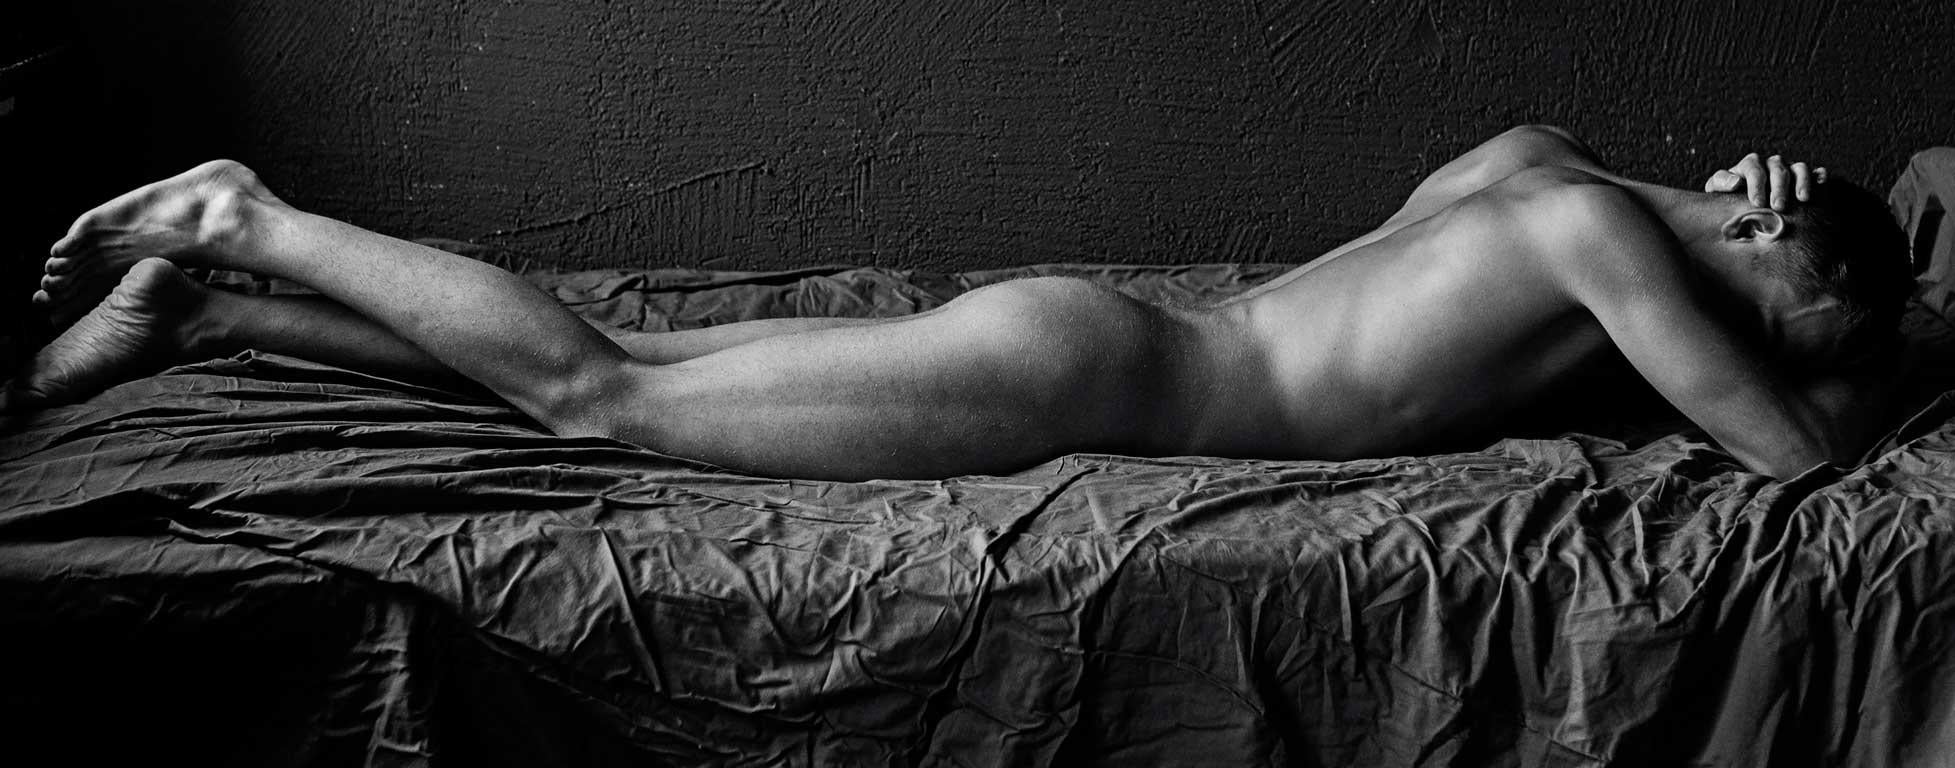 Tommy (Nude male lies prone in a Vogue Italia shoot) - Print by Sergey Vinogradov